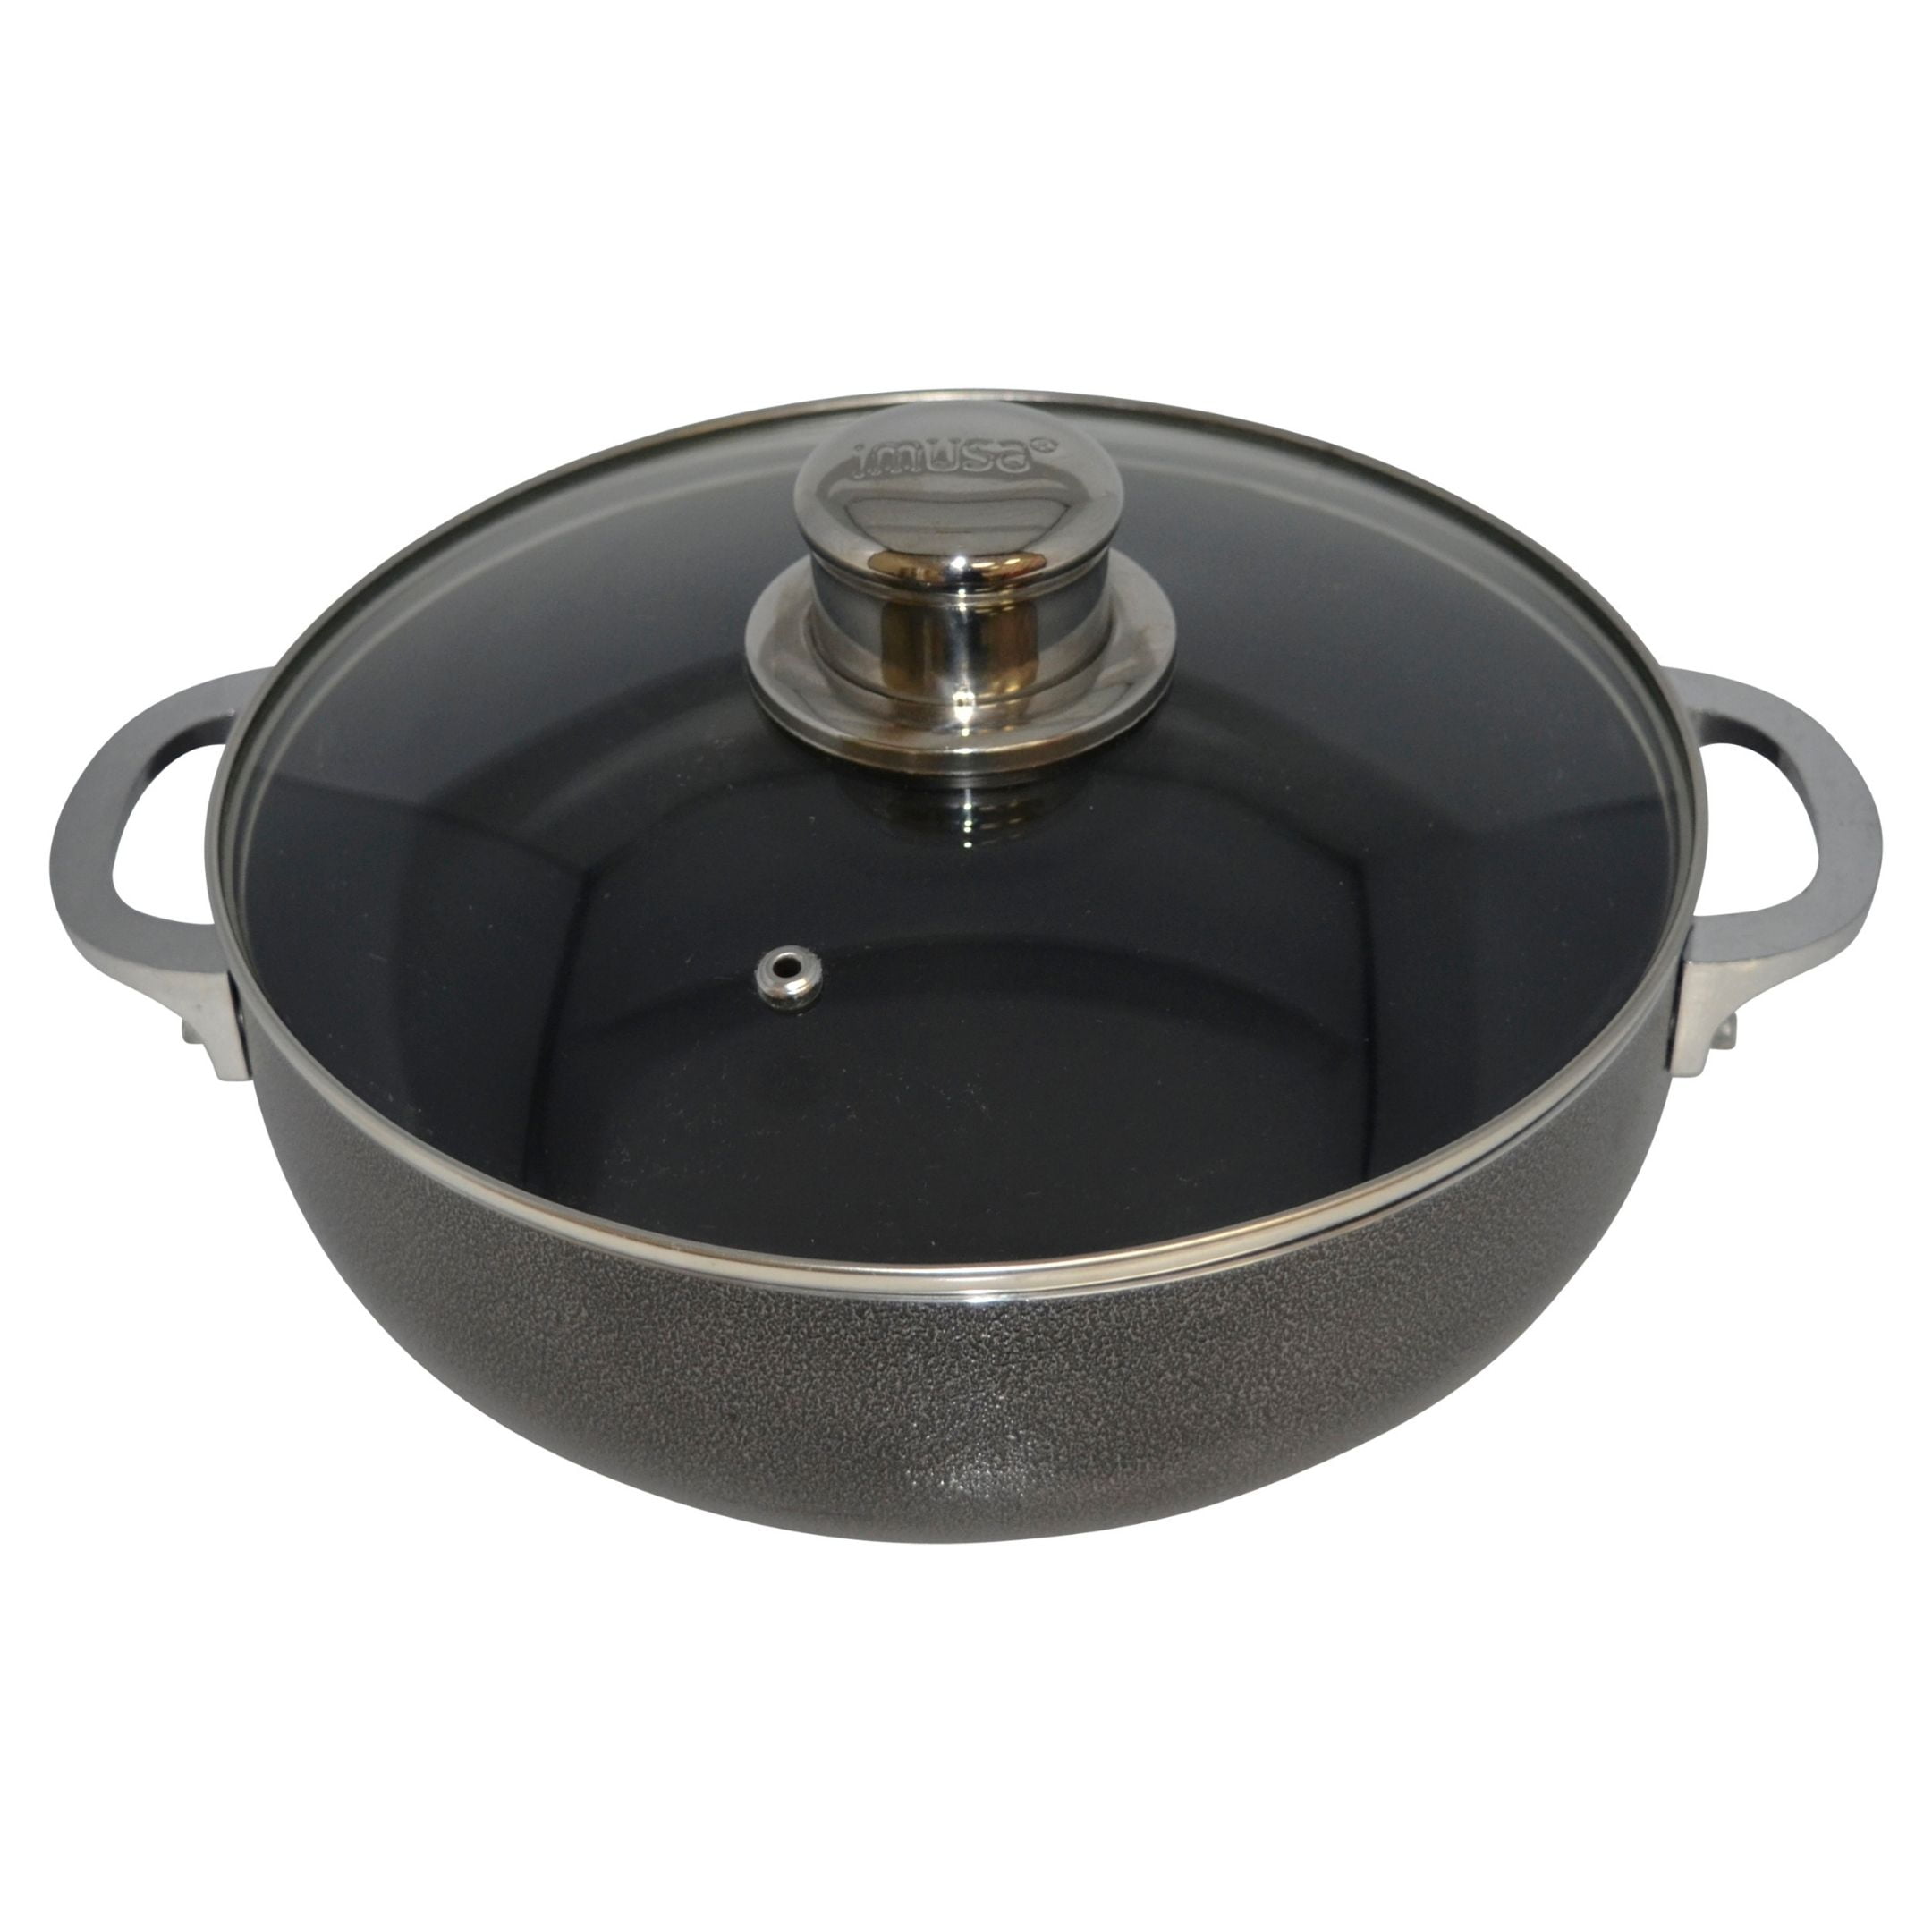 Imusa 12.7 Quart Nonstick Charcoal Exterior Stockpot with Glass